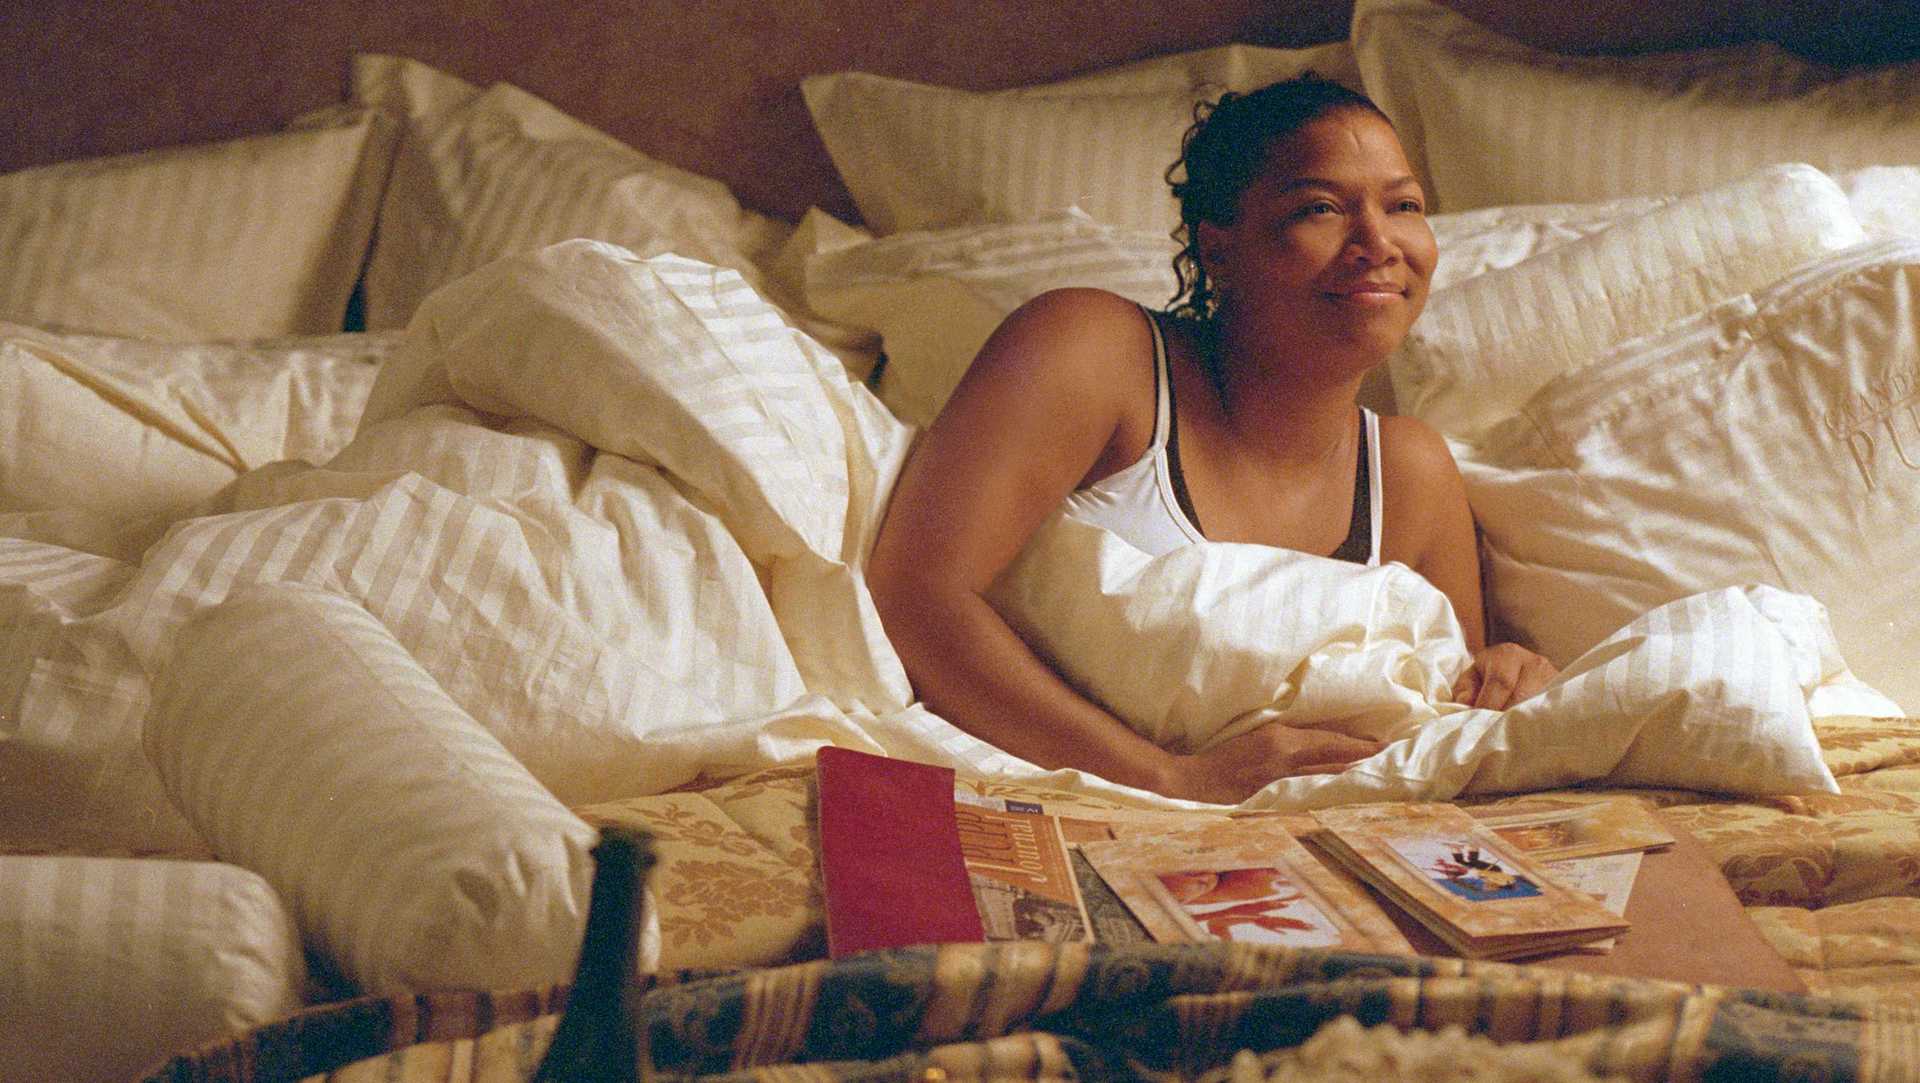 Georgia (Queen Latifah) laying in bed with travel books in 'Last Holiday'